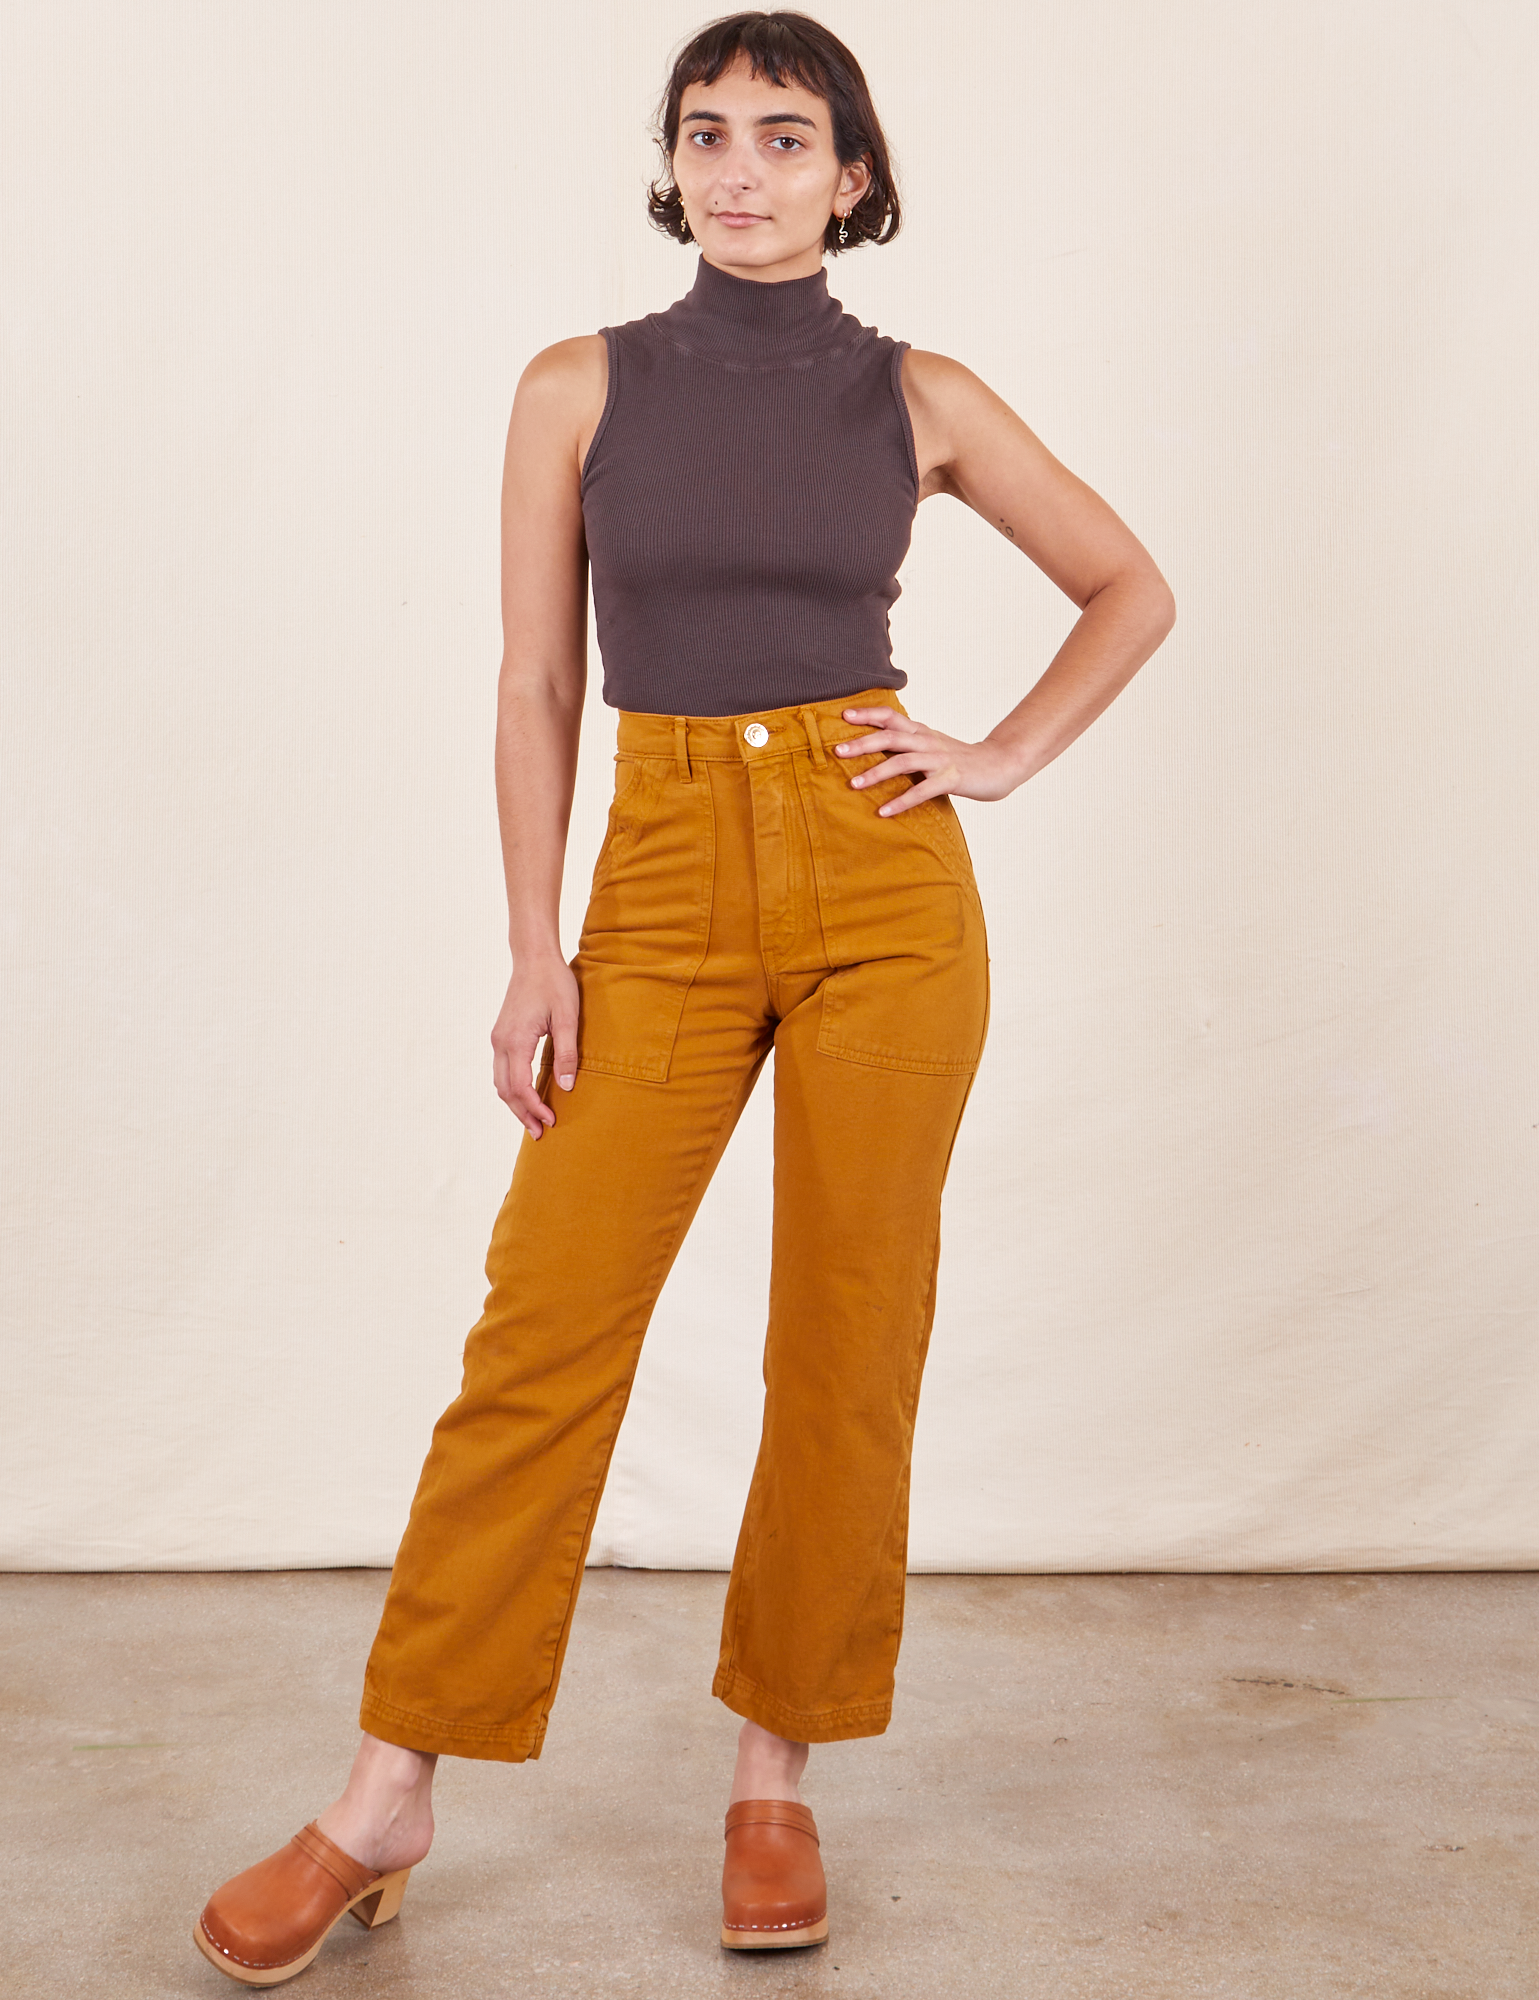 Soraya is 5&#39;2&quot; and wearing Petite XXS Work Pants in Spicy Mustard paired with an espresso brown Sleeveless Turtleneck